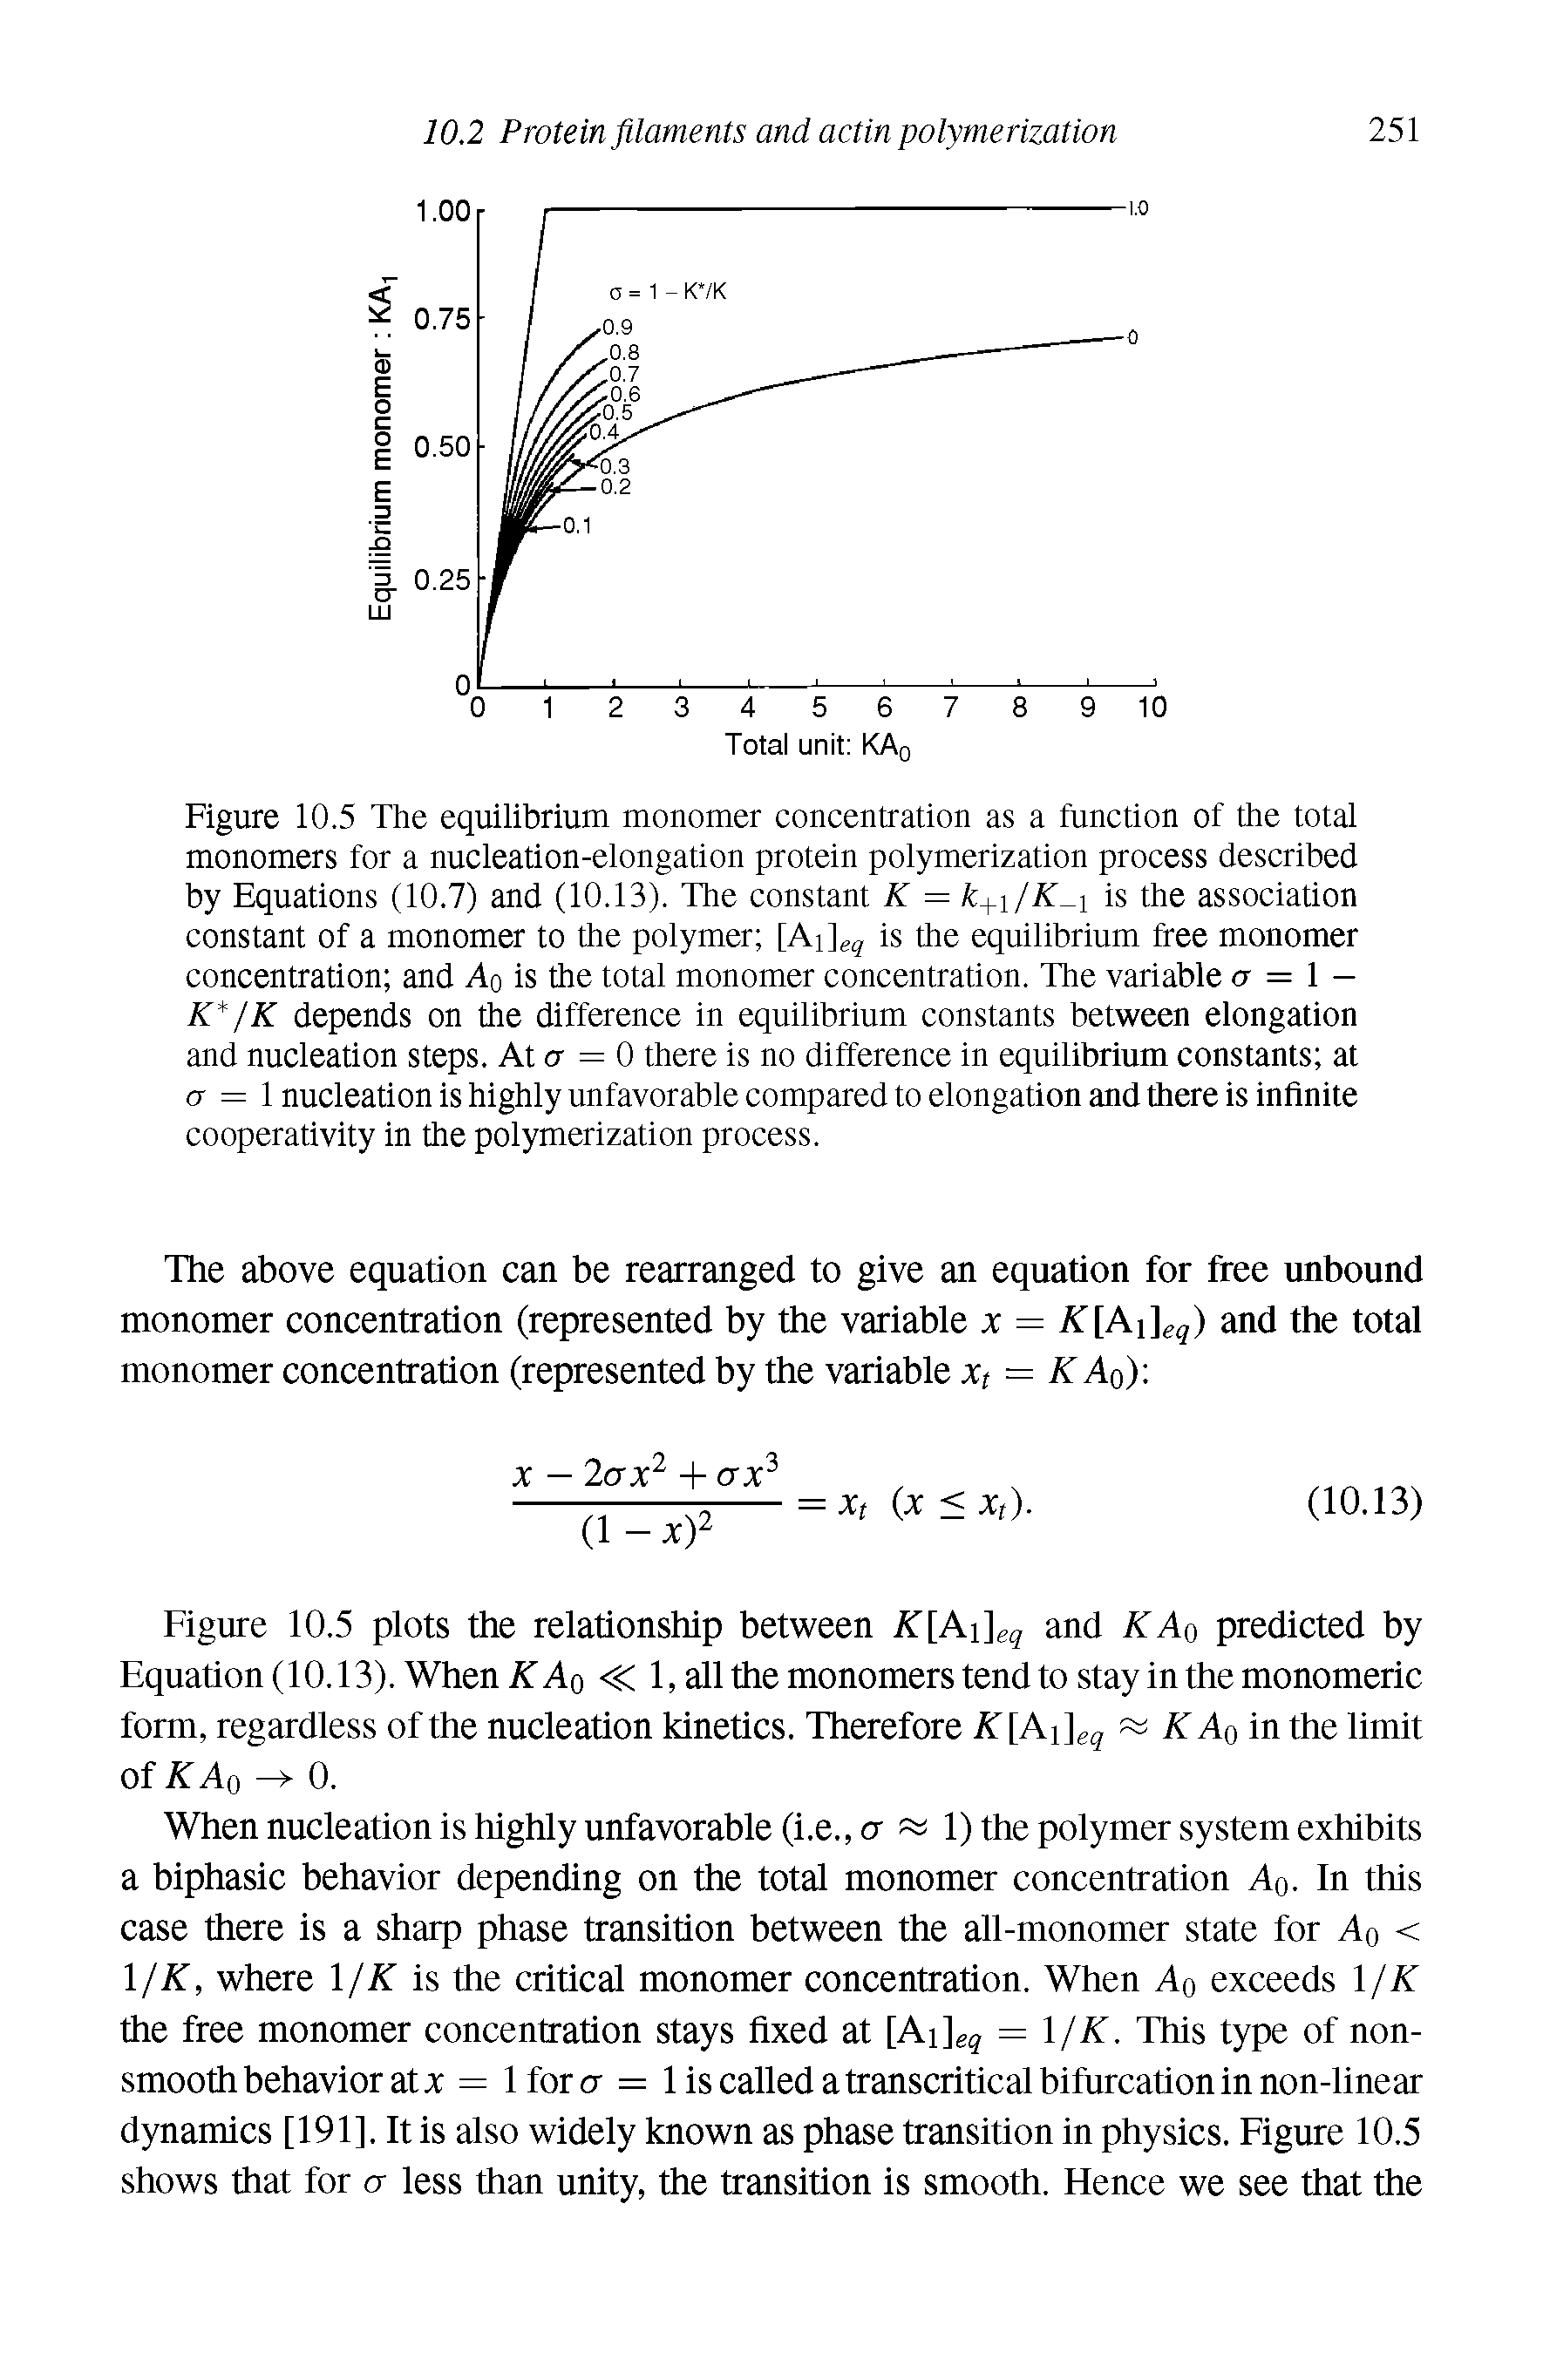 Figure 10.5 The equilibrium monomer concentration as a function of the total monomers for a nucleation-elongation protein polymerization process described by Equations (10.7) and (10.13). The constant K = k+ /K is the association constant of a monomer to the polymer [A ]eq is the equilibrium free monomer concentration and A is the total monomer concentration. The variable a = 1 — K /K depends on the difference in equilibrium constants between elongation and nucleation steps. At a = 0 there is no difference in equilibrium constants at er = l nucleation is highly unfavorable compared to elongation and there is infinite cooperativity in the polymerization process.